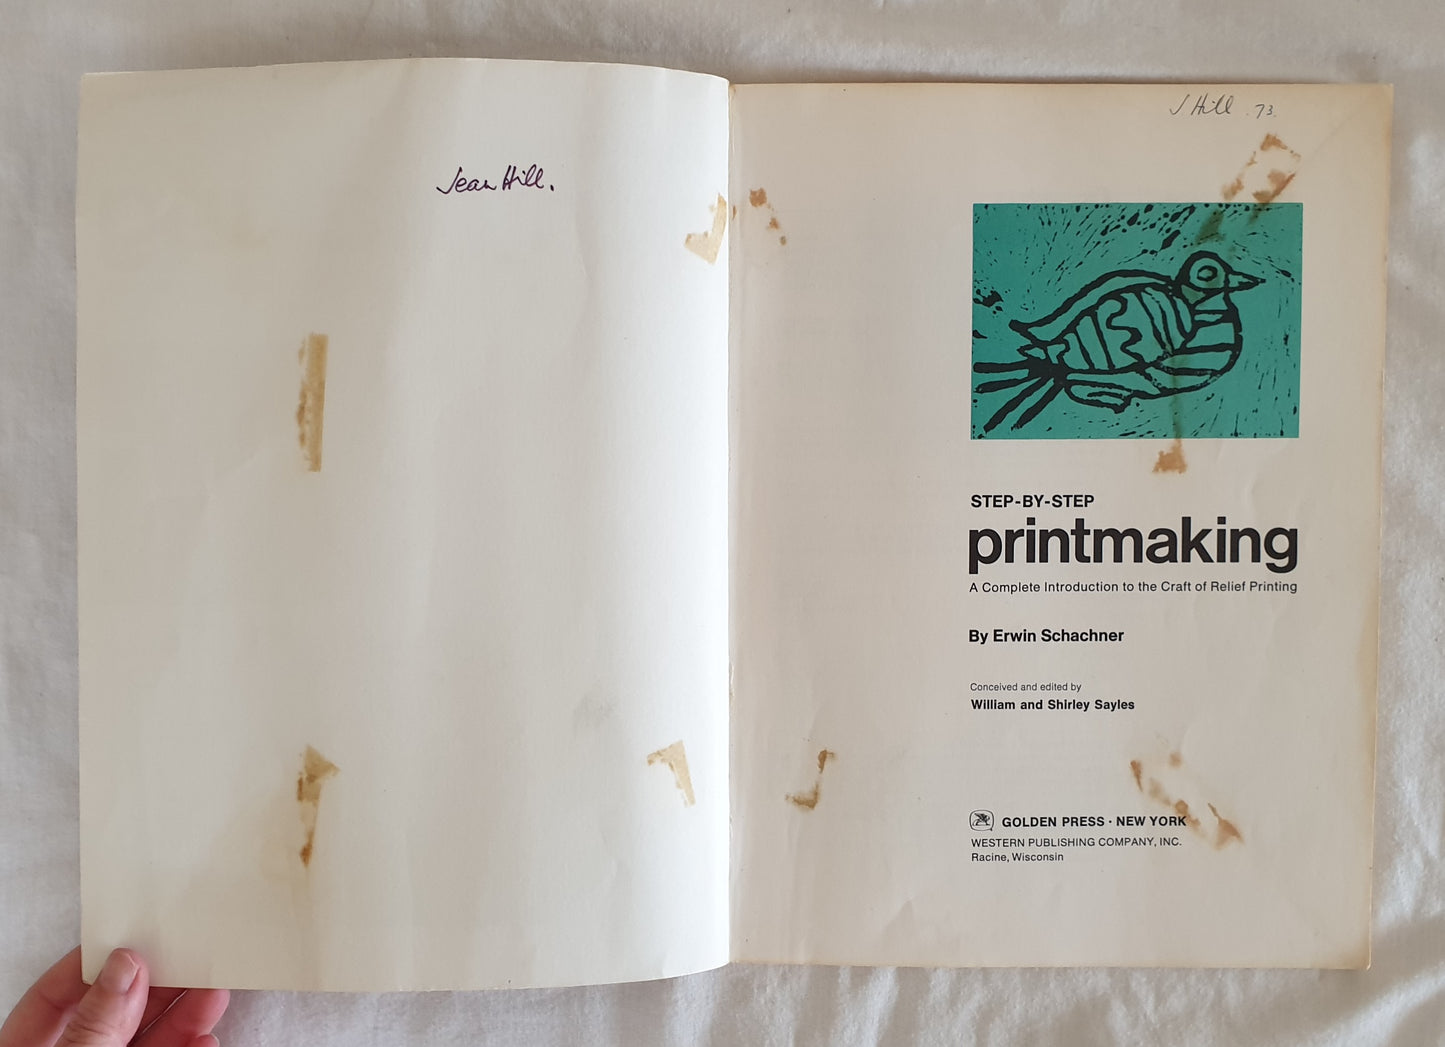 Step-By-Step Printmaking by Erwin Schachner